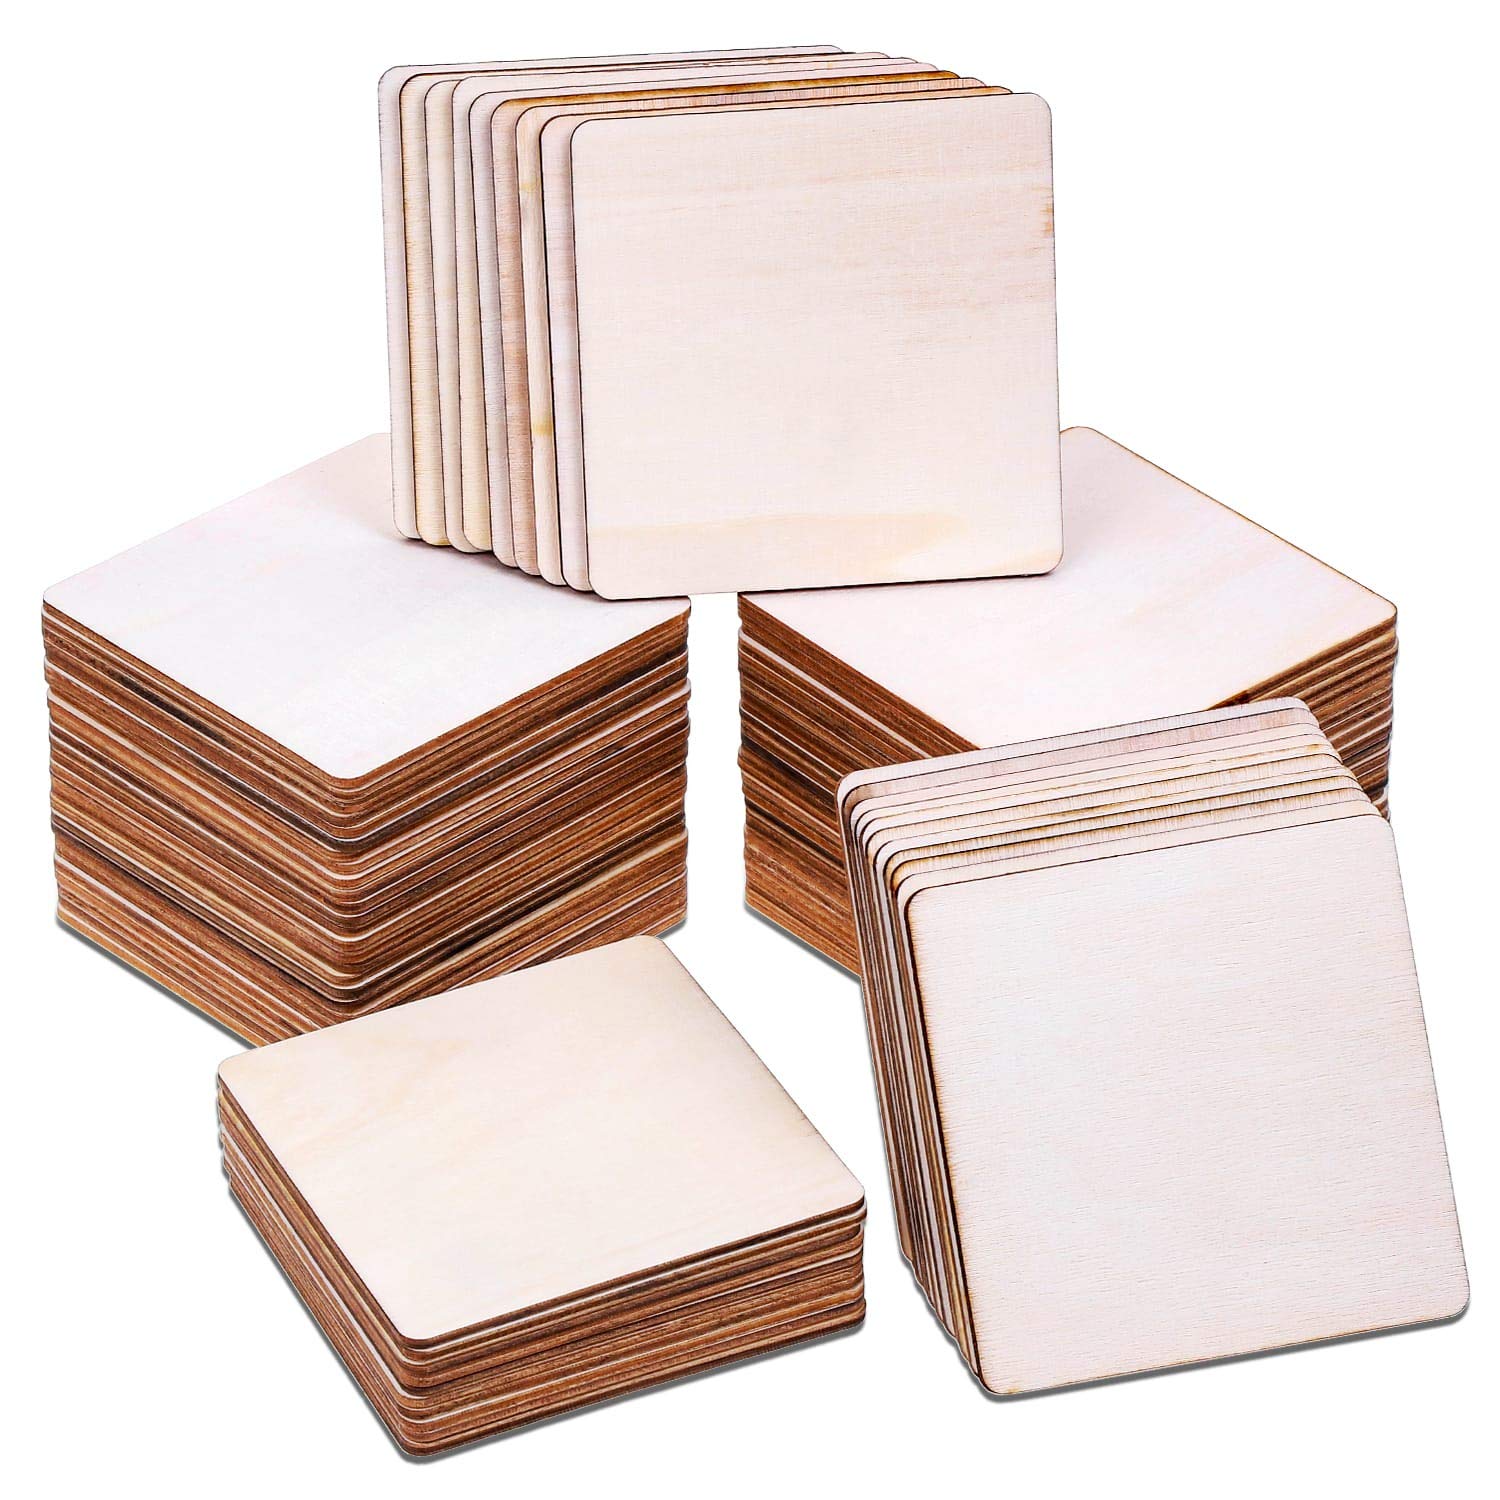 Selizo 22Pcs 4 Inch Unfinished Blank Wood Pieces Wooden Slices Unfinished  Wood Cutouts for Wood Burning Carbon Transfer Paper Pr